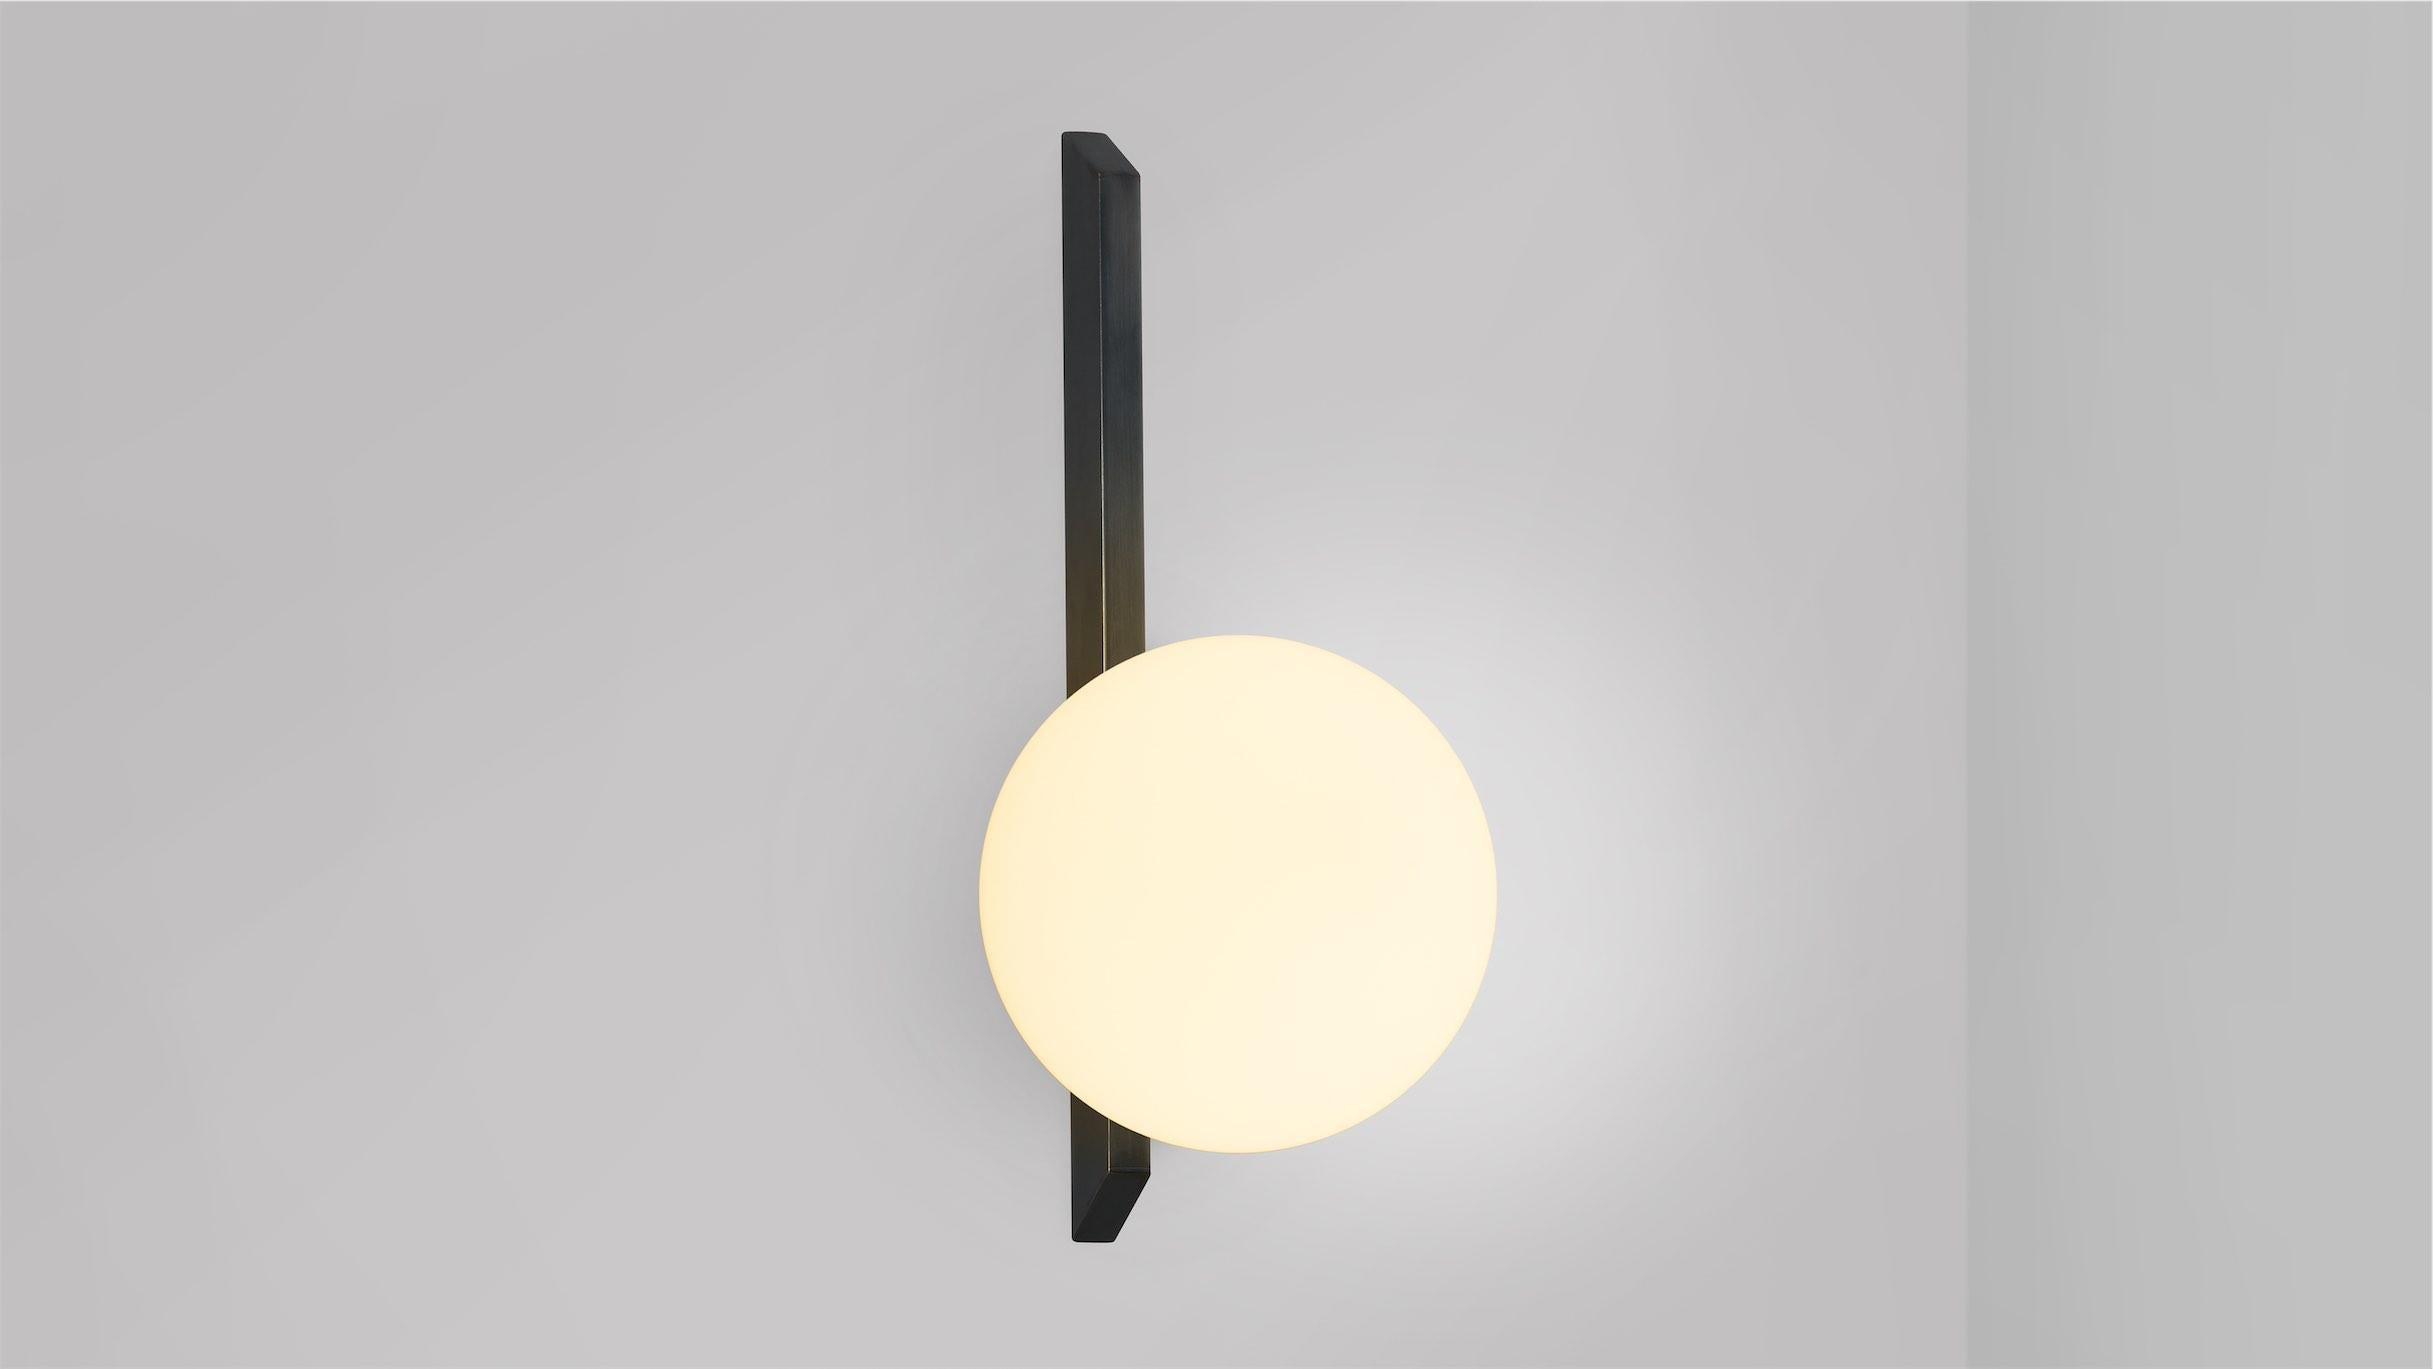 Tall Gaia wall lamp by CTO Lighting
Materials: Bronze with matt opal glass.
Dimensions: D 18.3 x W 15 x H 35 cm
Available in bronze or satin brass and in hand shaped smoke glass, matte opal glass, shiny opal glass, or tinted glass.

An elegant